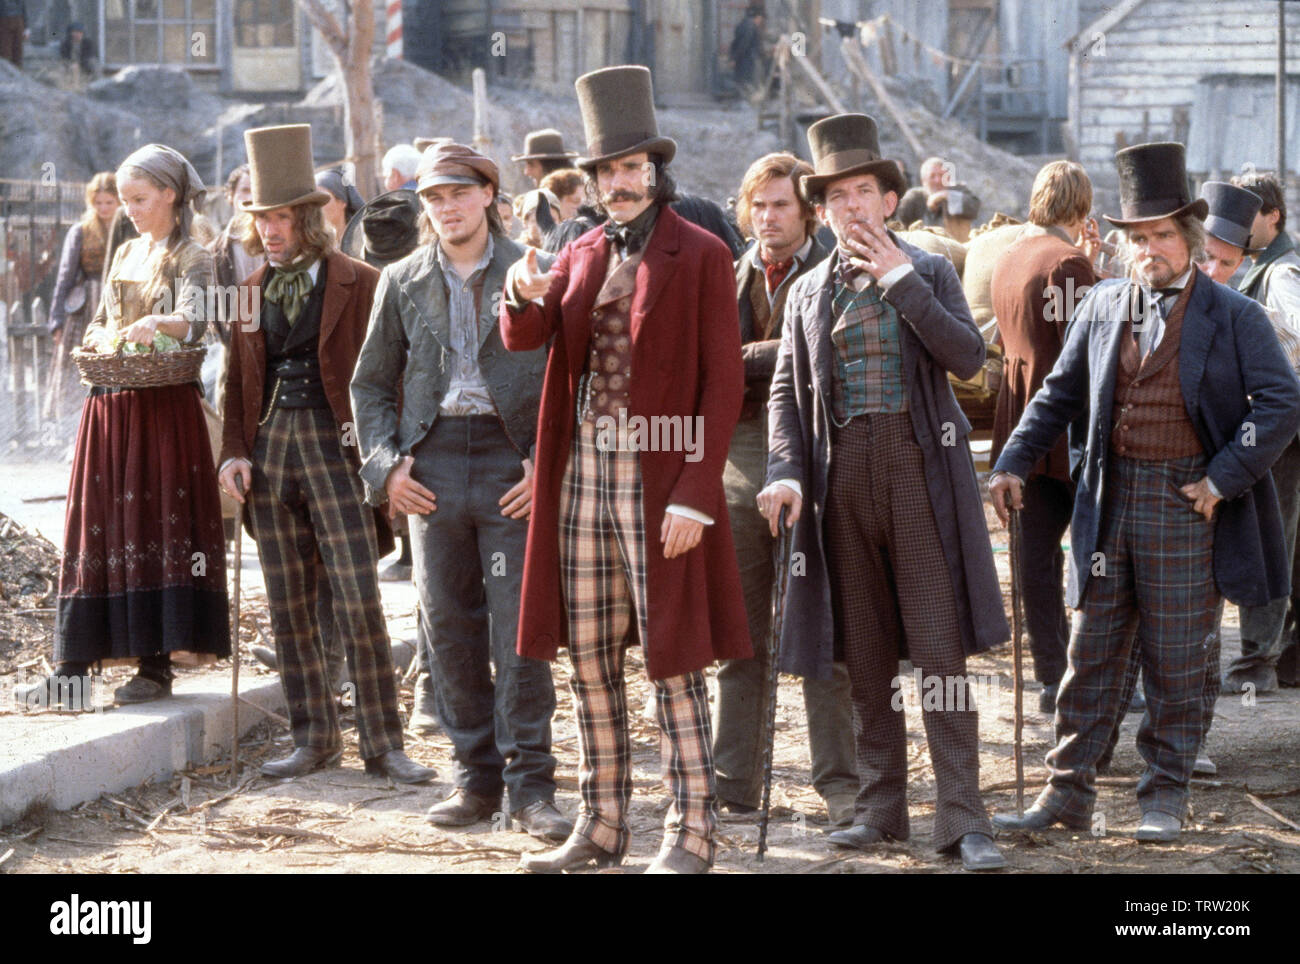 DANIEL DAY-LEWIS , LEONARDO DICAPRIO and HENRY THOMAS in GANGS OF NEW YORK (2002). Copyright: Editorial use only. No merchandising or book covers. This is a publicly distributed handout. Access rights only, no license of copyright provided. Only to be reproduced in conjunction with promotion of this film. Credit: MIRAMAX / TURSI, MARIO / Album Stock Photo